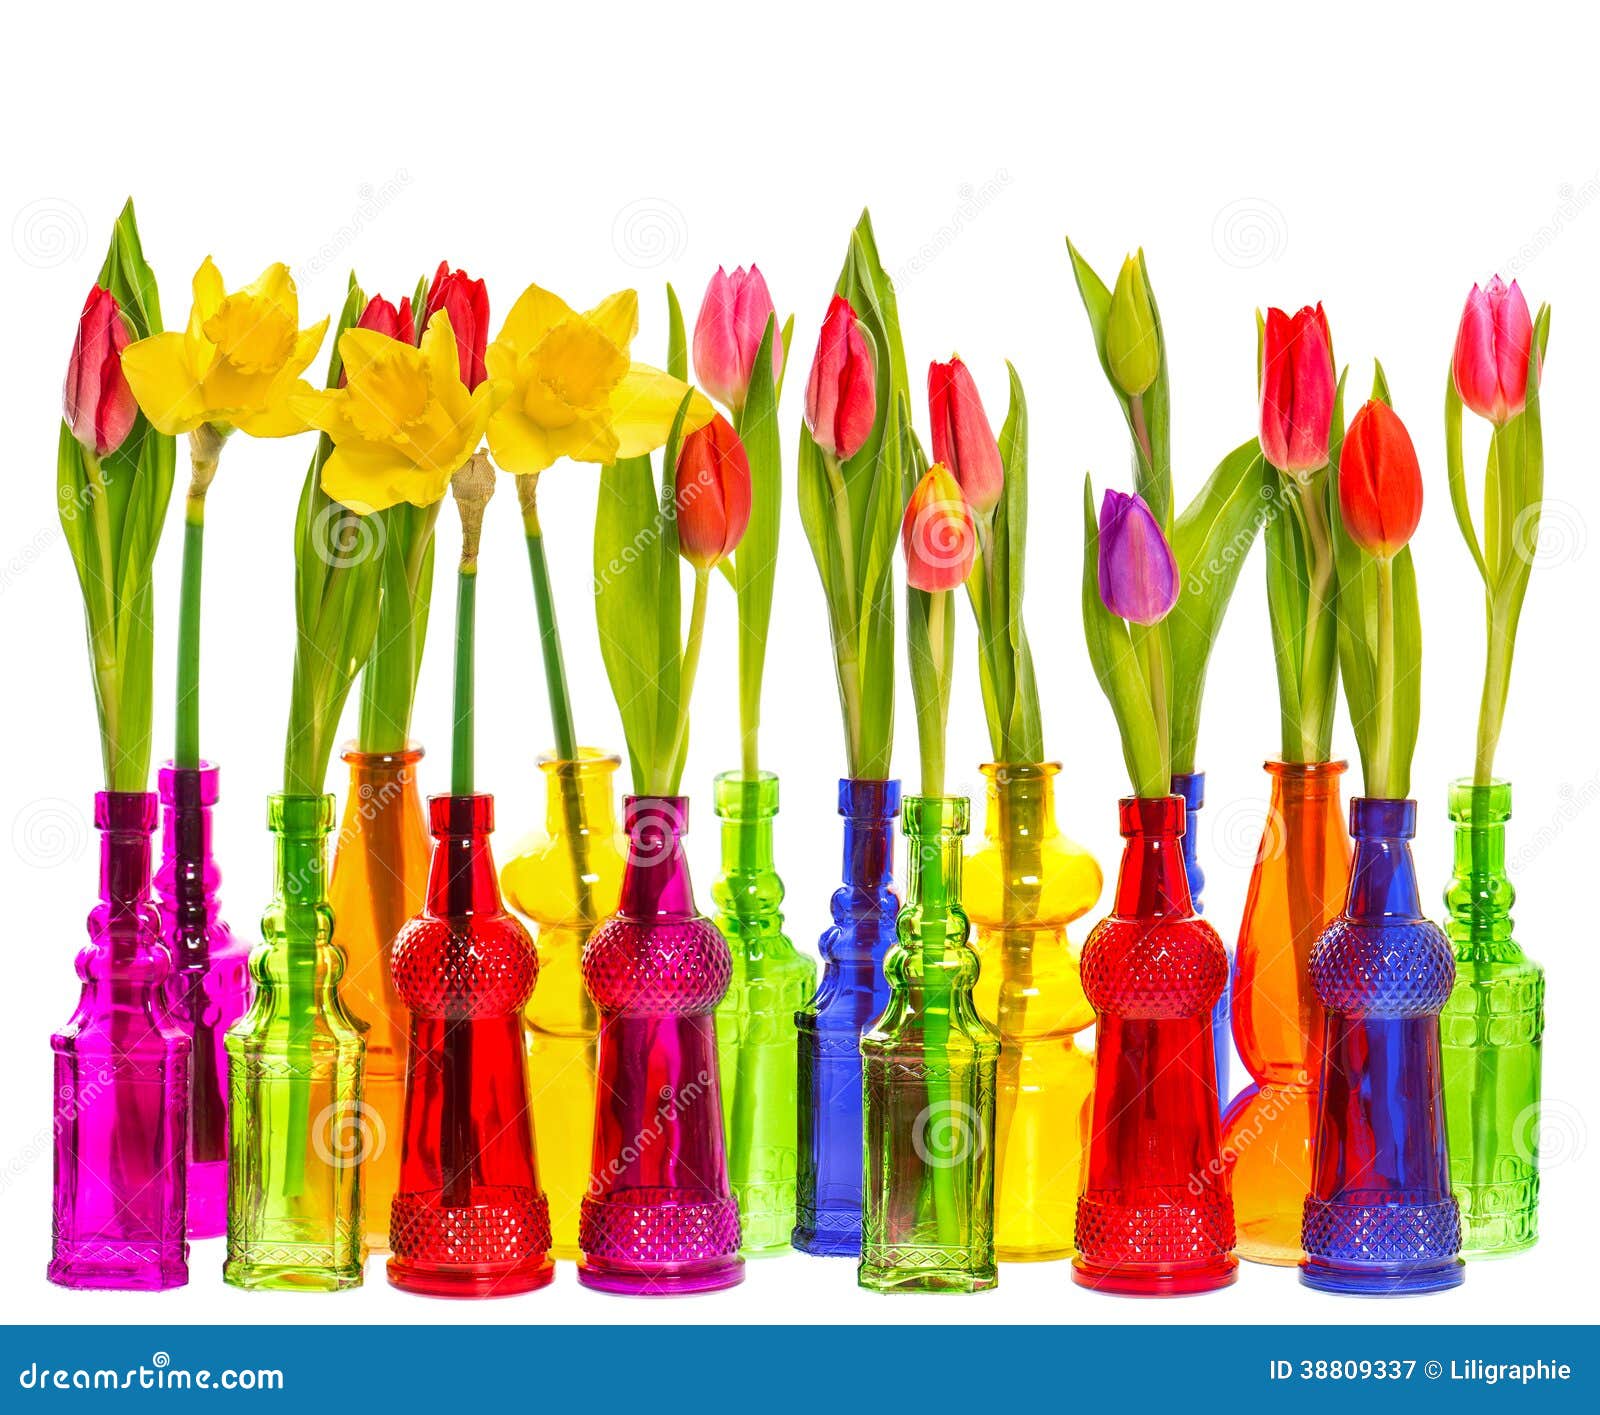 Many Tulip And Narcissus Flowers In Colorful Vases Stock Image - Image ...